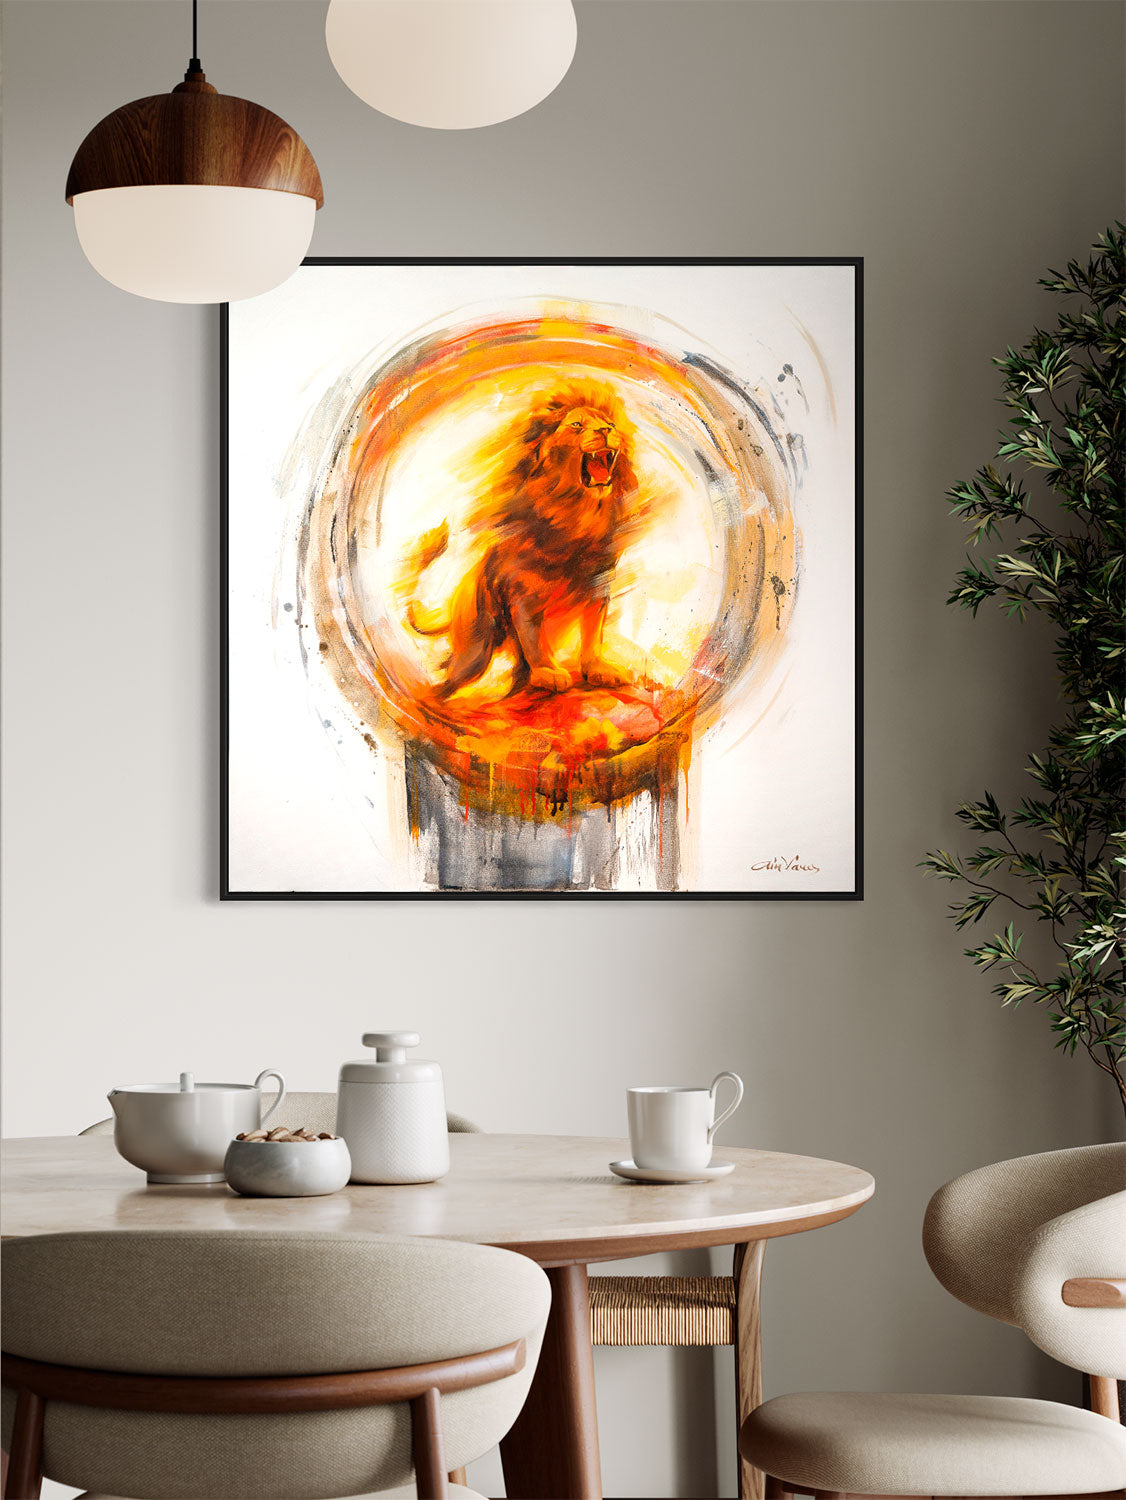 Prophetic Art Print "The Lord roars over his people", Isaiah 61:3, Revelation 5:5, Ain Vares Art